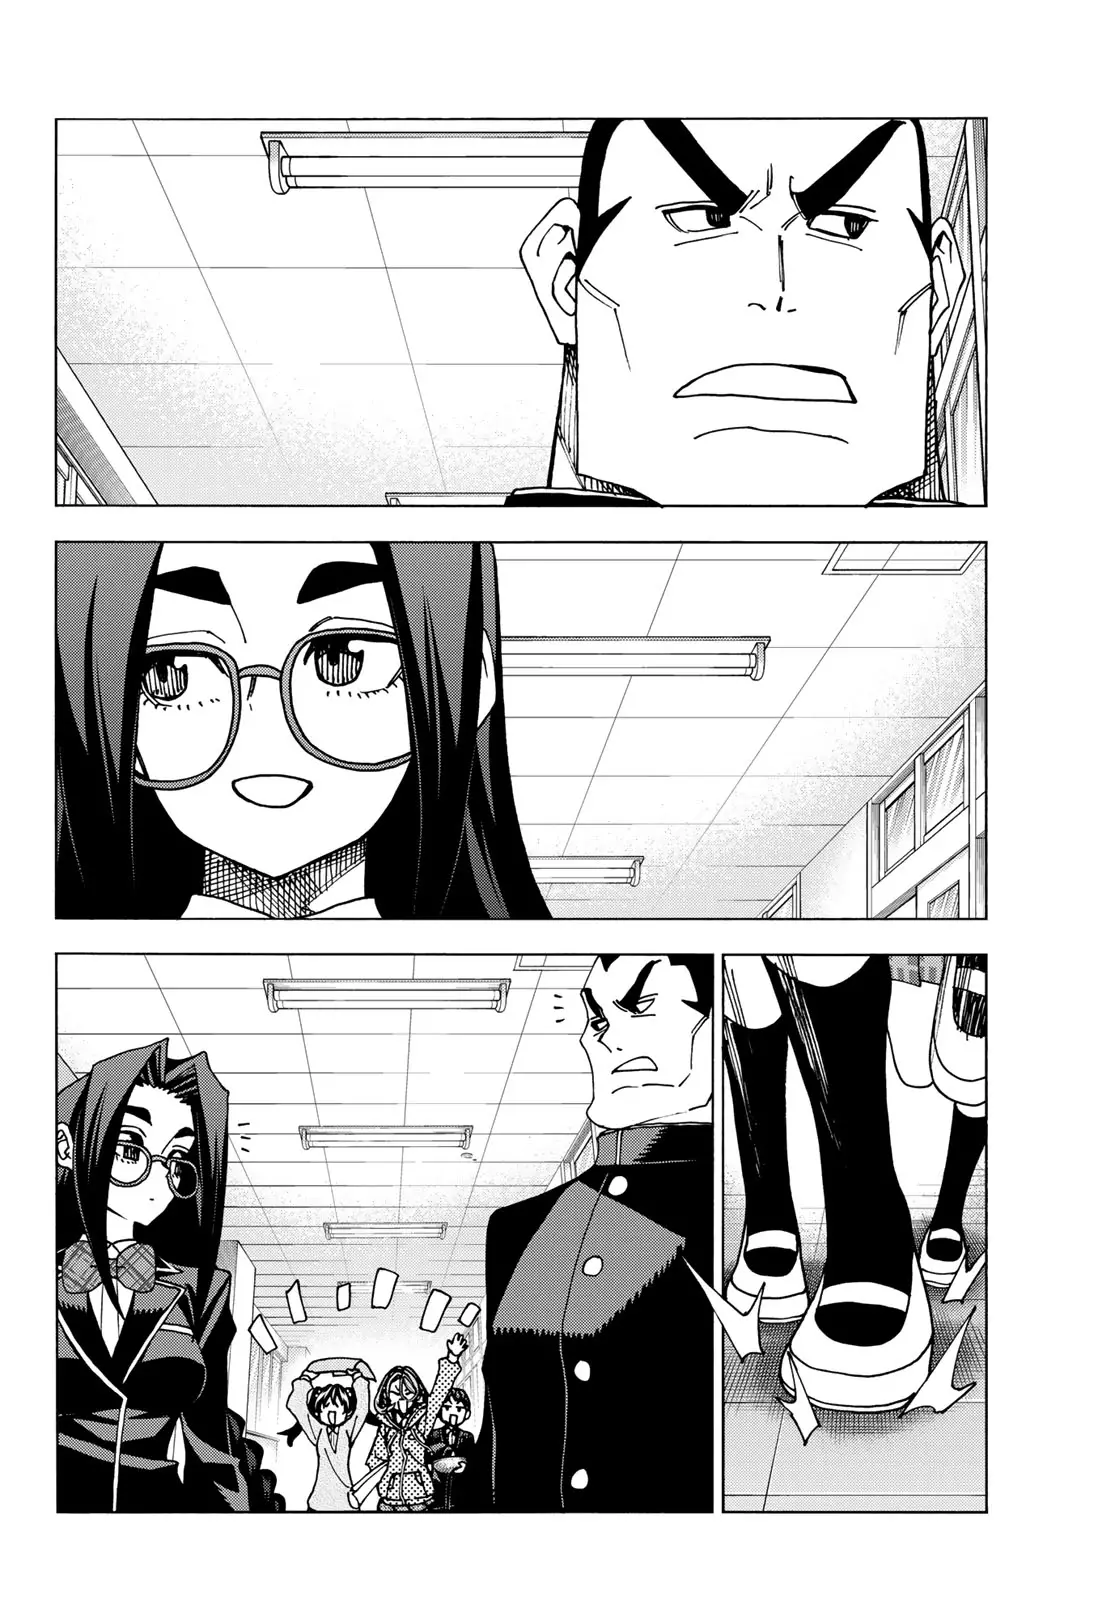 The Story Between A Dumb Prefect And A High School Girl With An Inappropriate Skirt Length - 56 page 2-874628a7